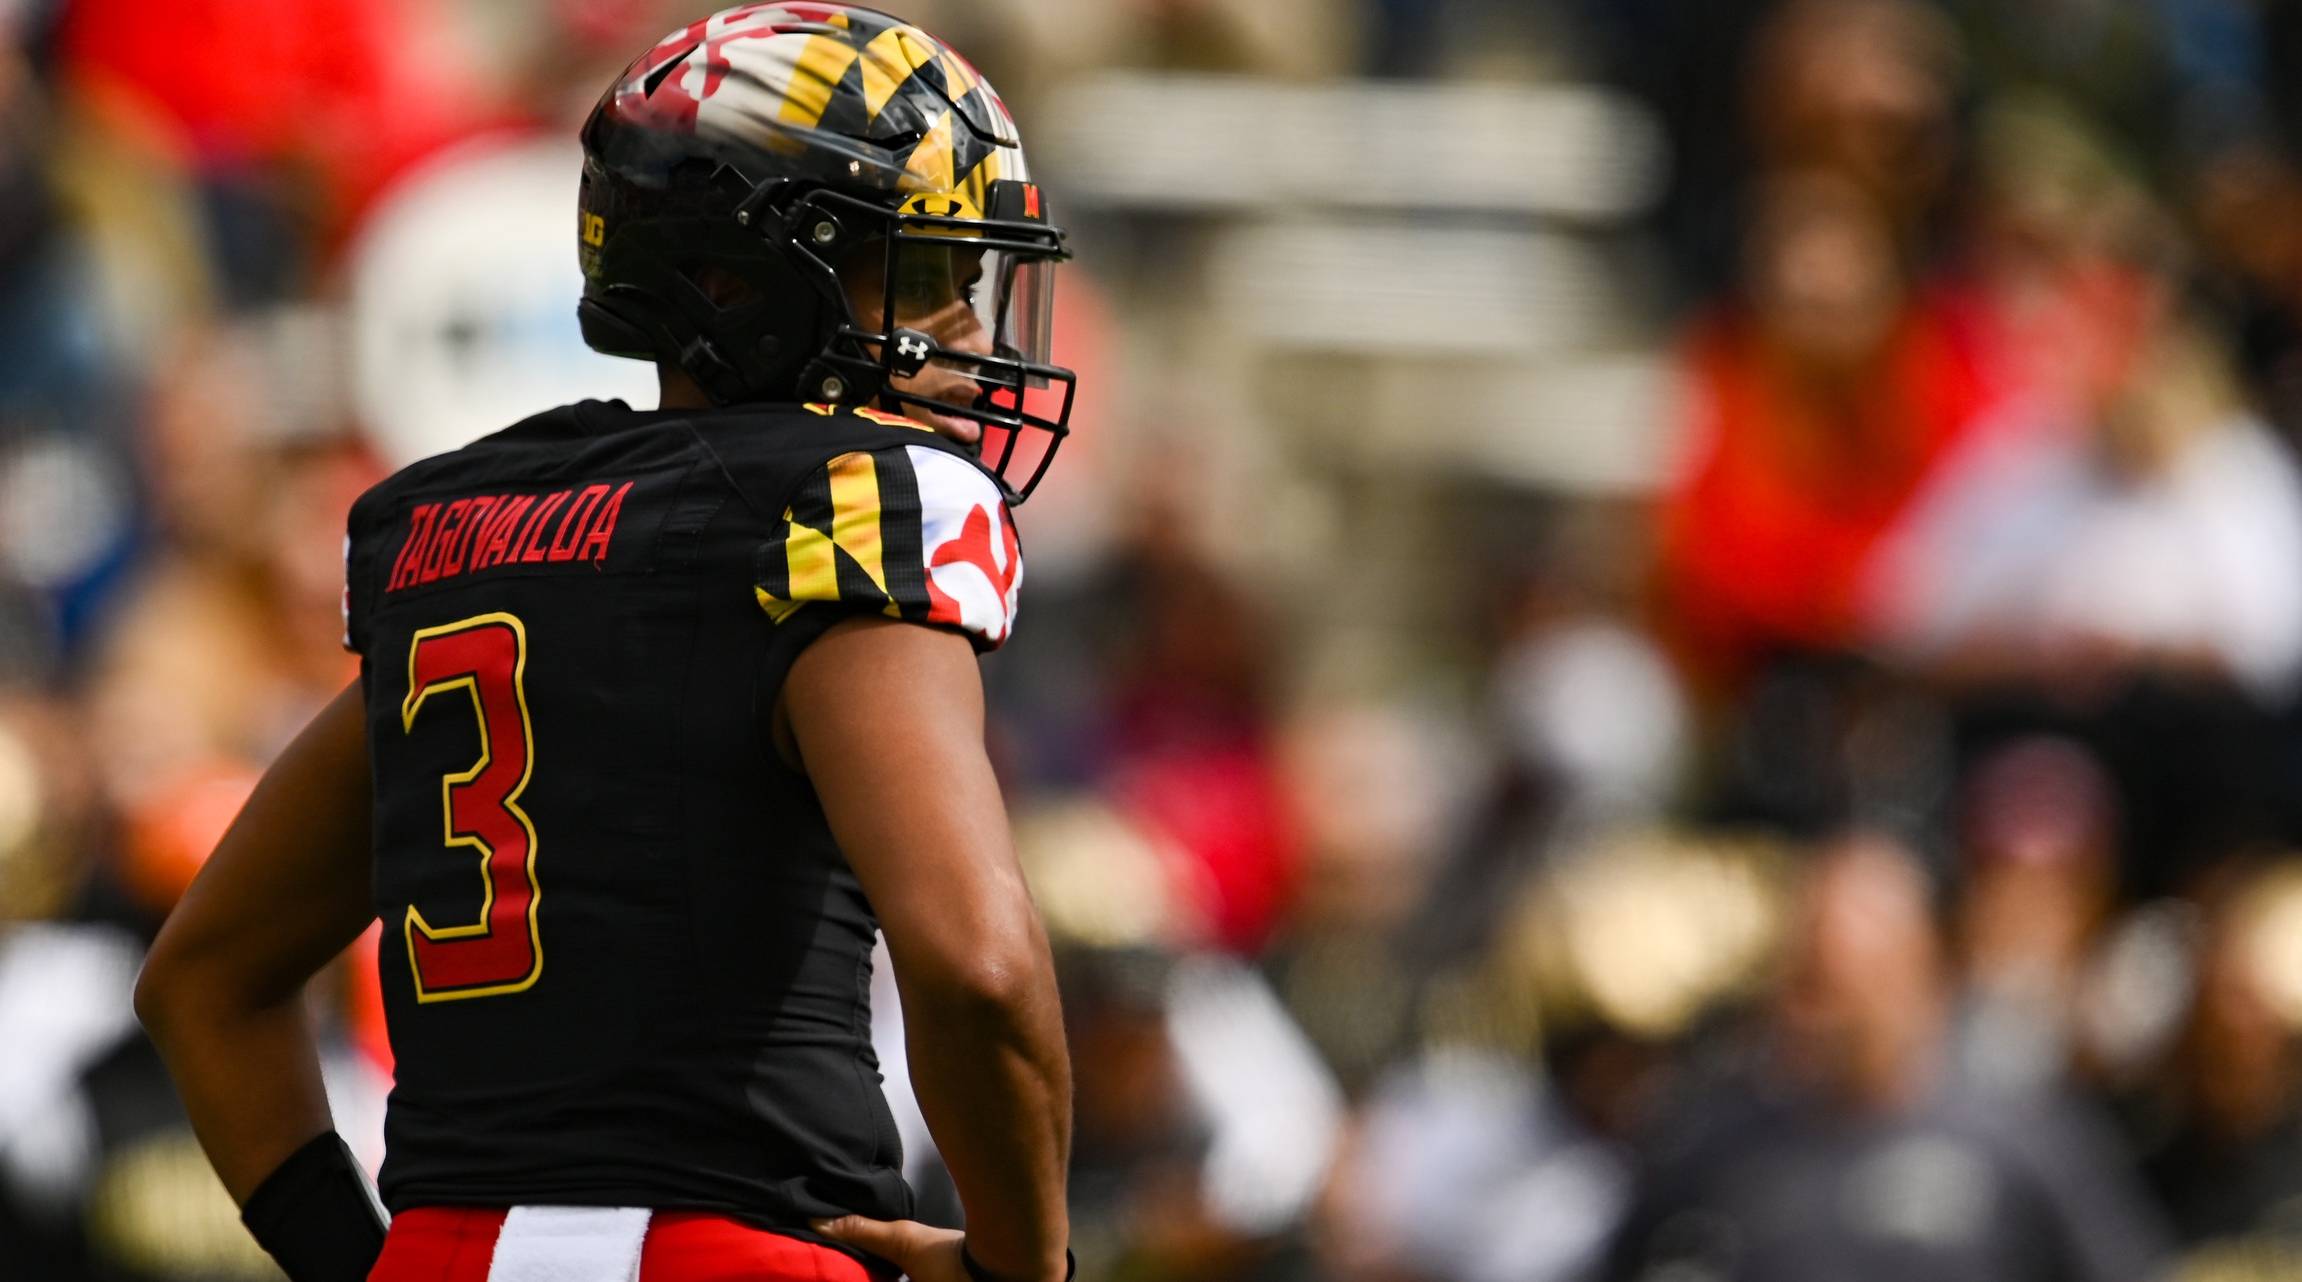 Maryland’s Taulia Tagovailoa ‘Gametime Decision’ After Knee Injury